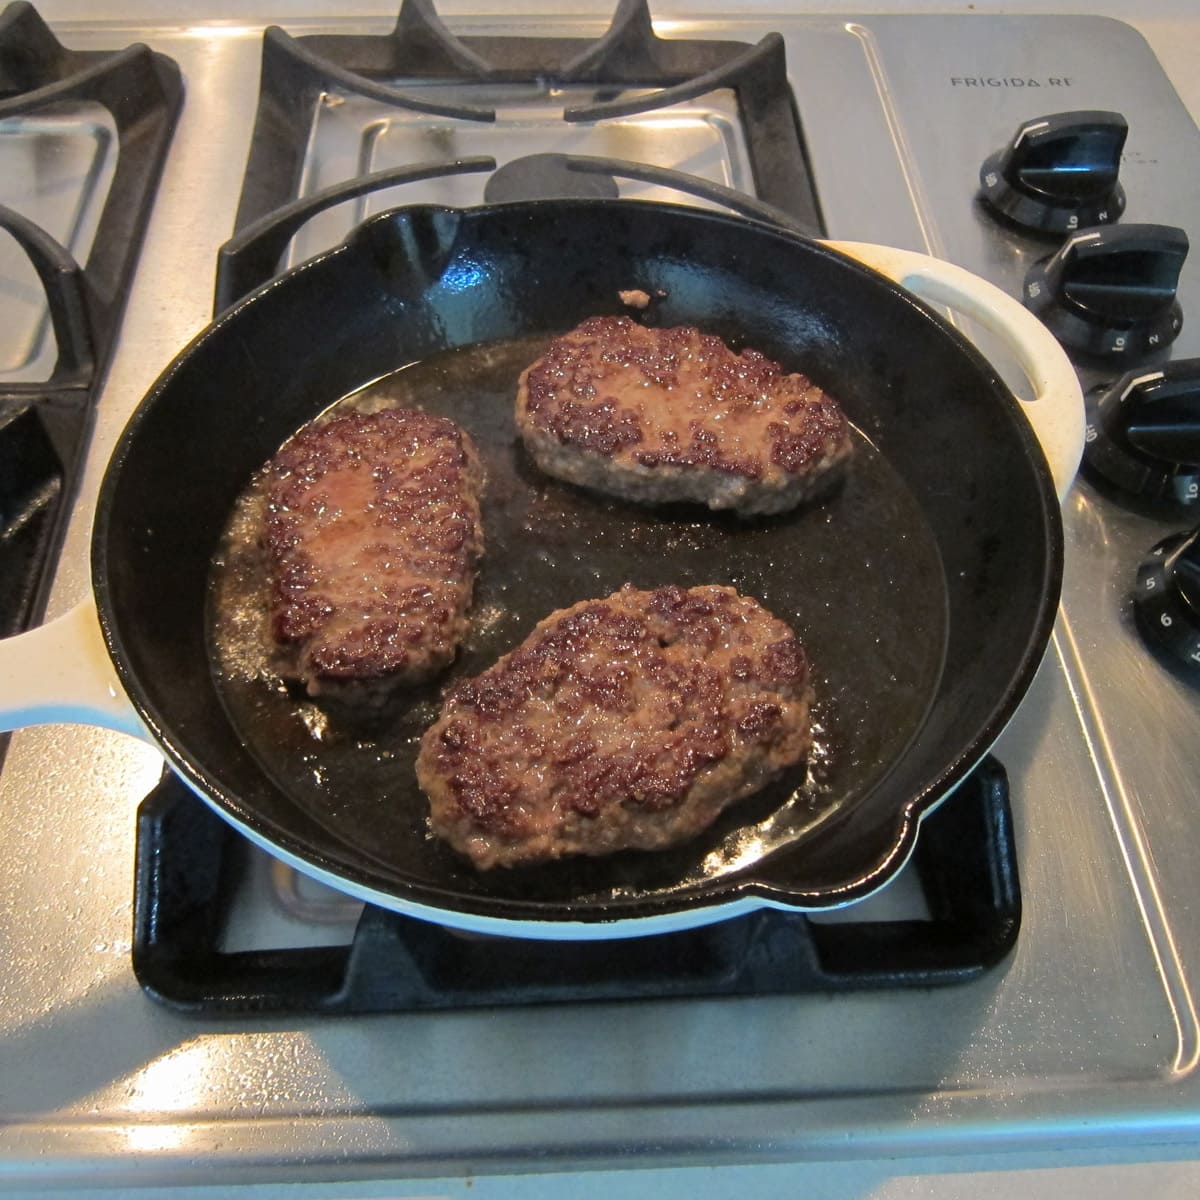 cooking skull-shaped hamburgers in a cast iron skillet.